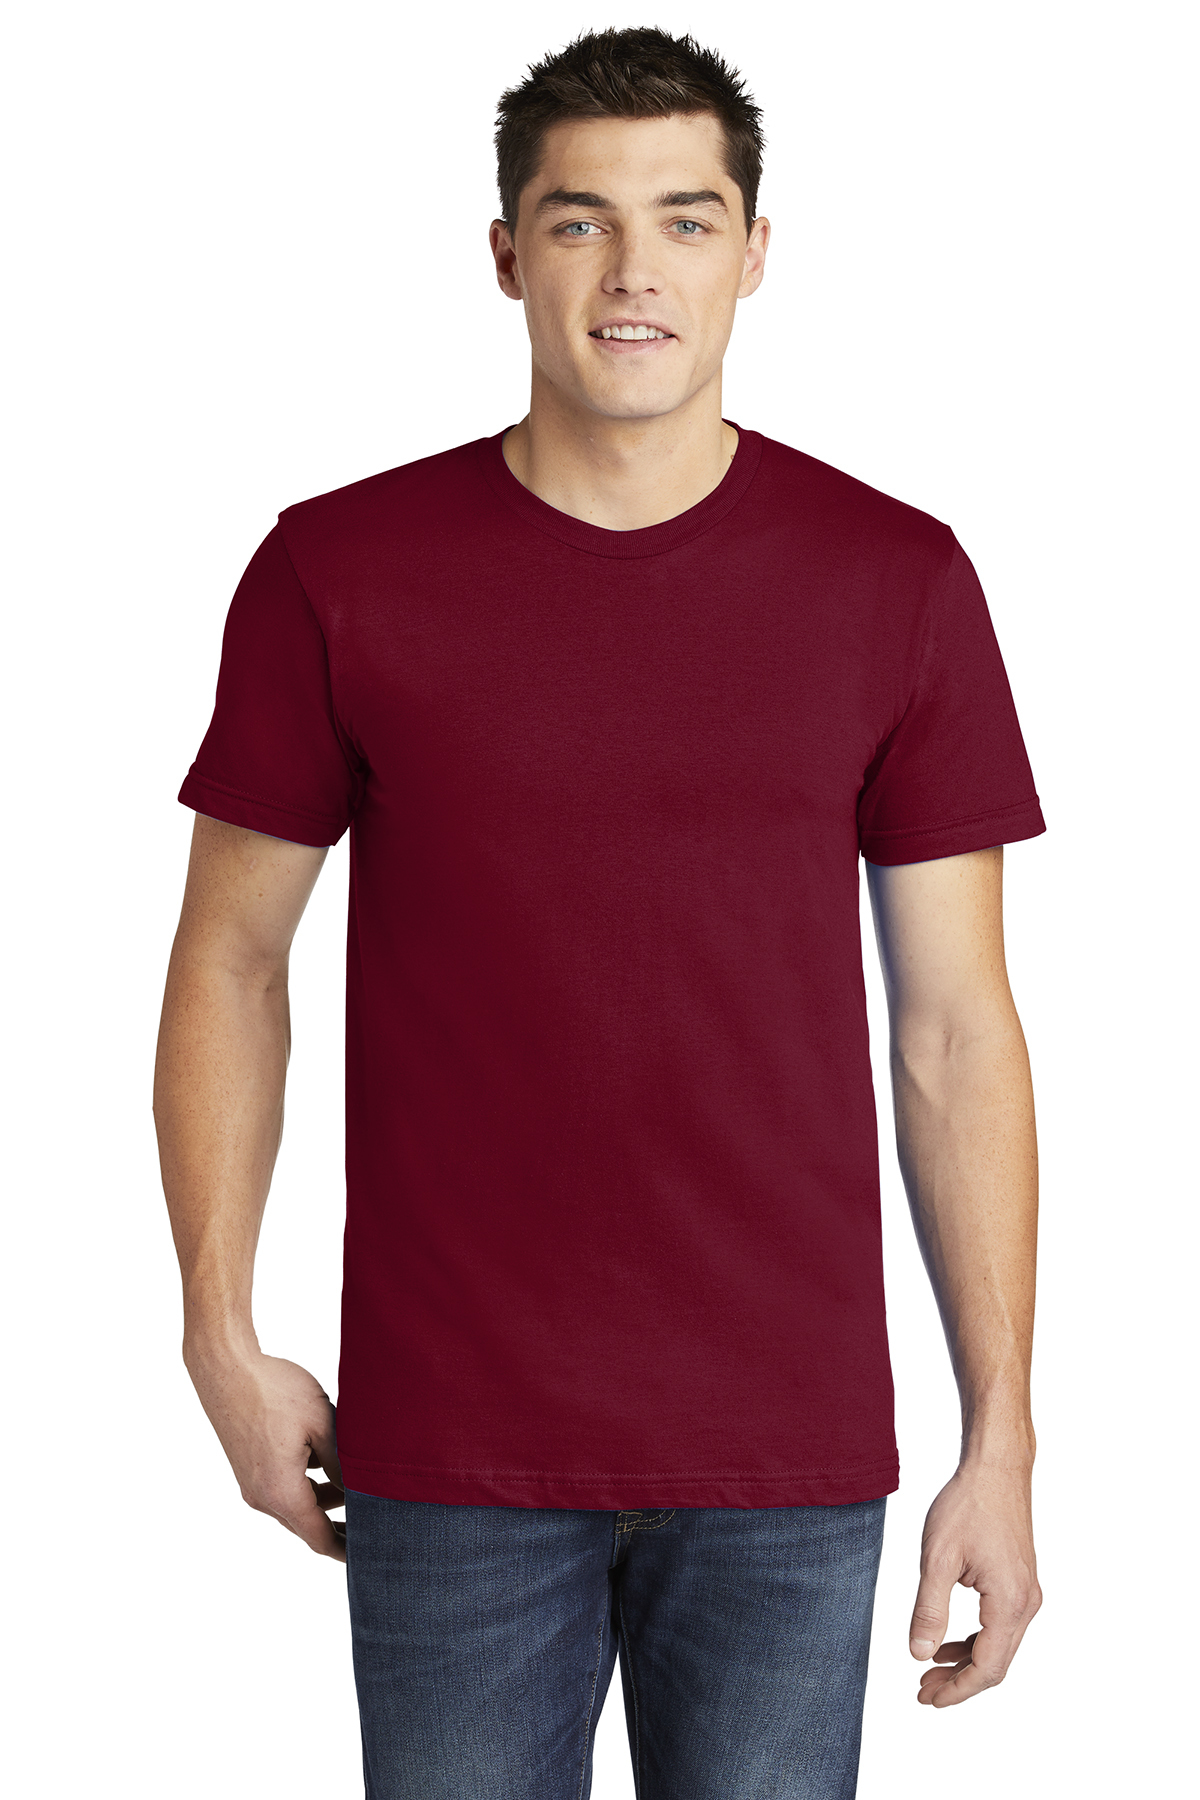 Premium Fine Jersey 100% Cotton T-Shirt - All American Clothing Co